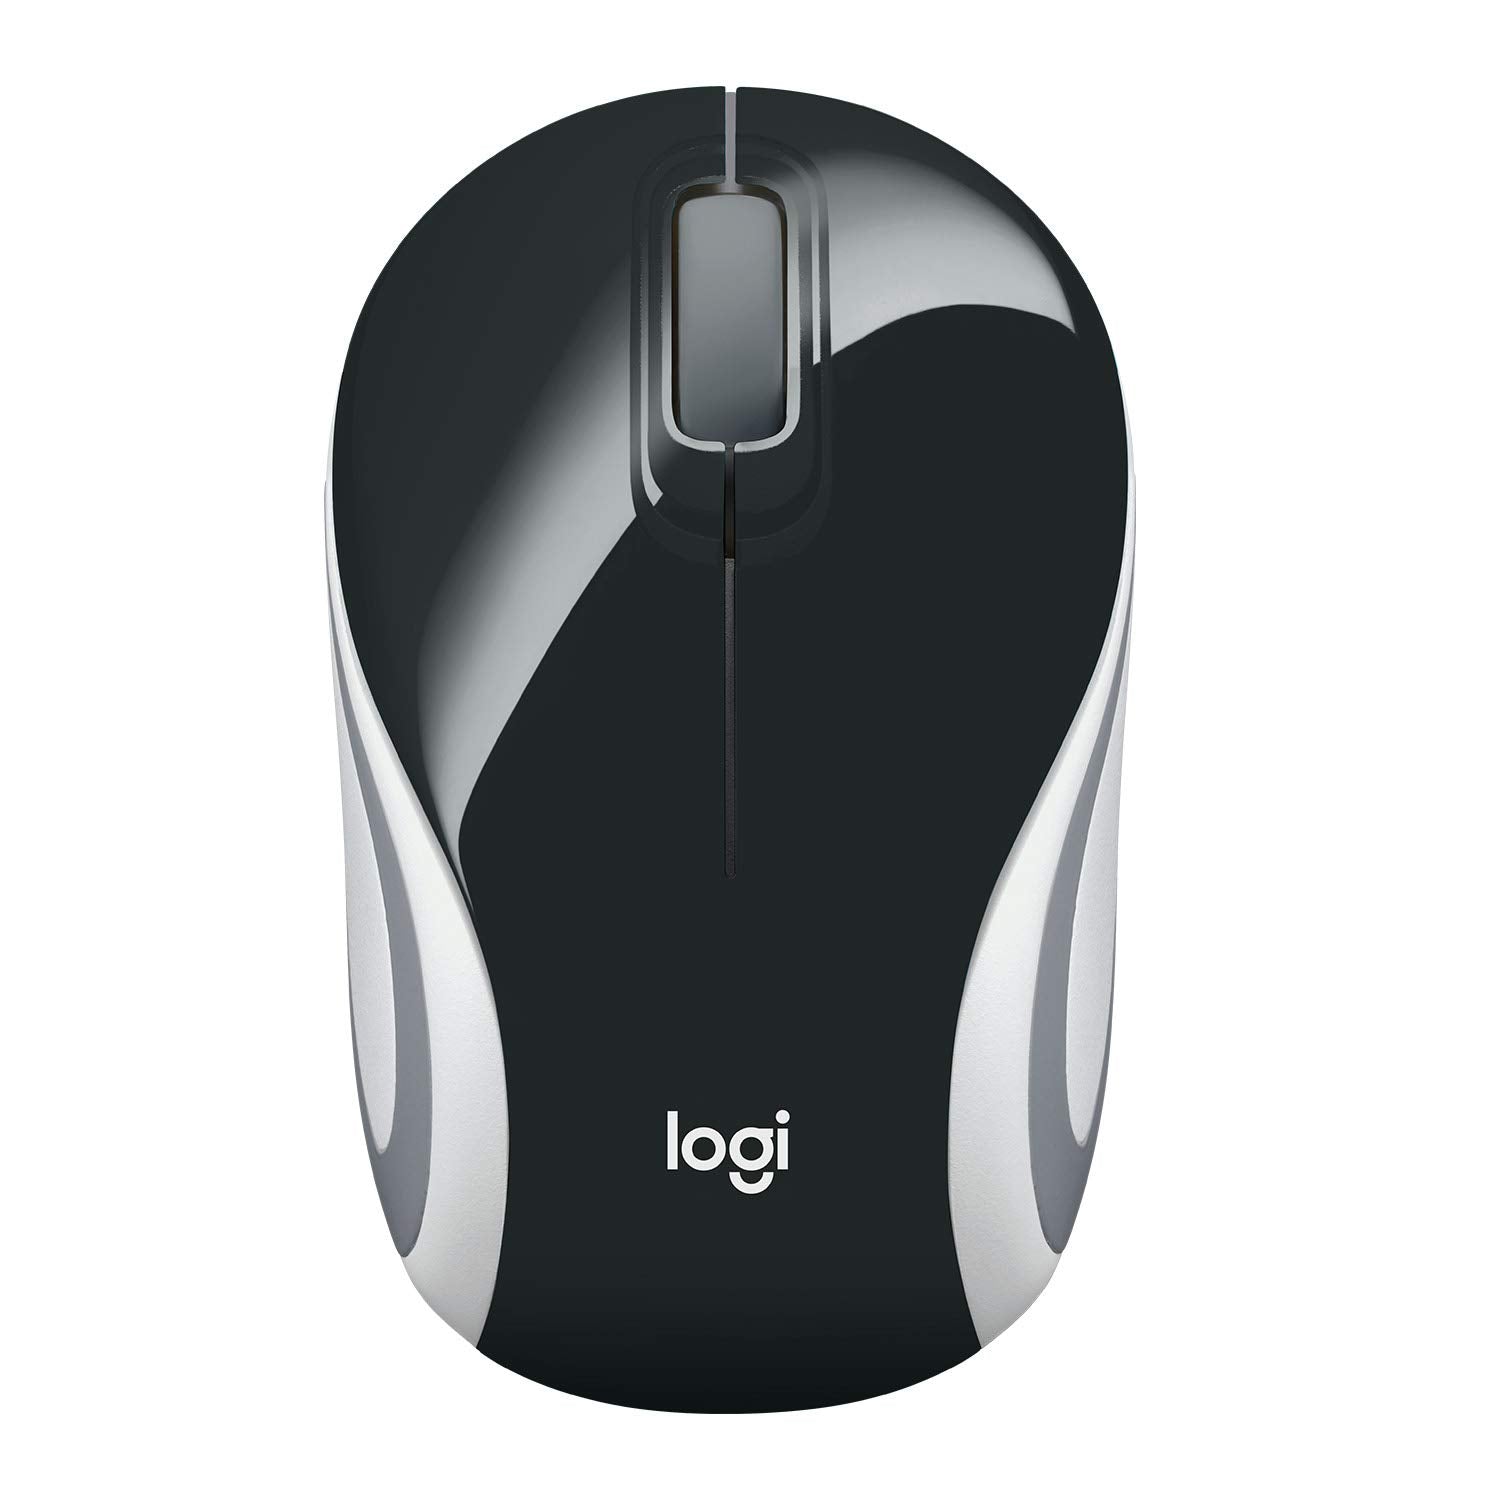 Logitech M187 Ultra Portable Wireless Mouse, 2.4 GHz with USB Receiver, 1000 DPI Optical Tracking, 3-Buttons, PC / Mac / Laptop - Black